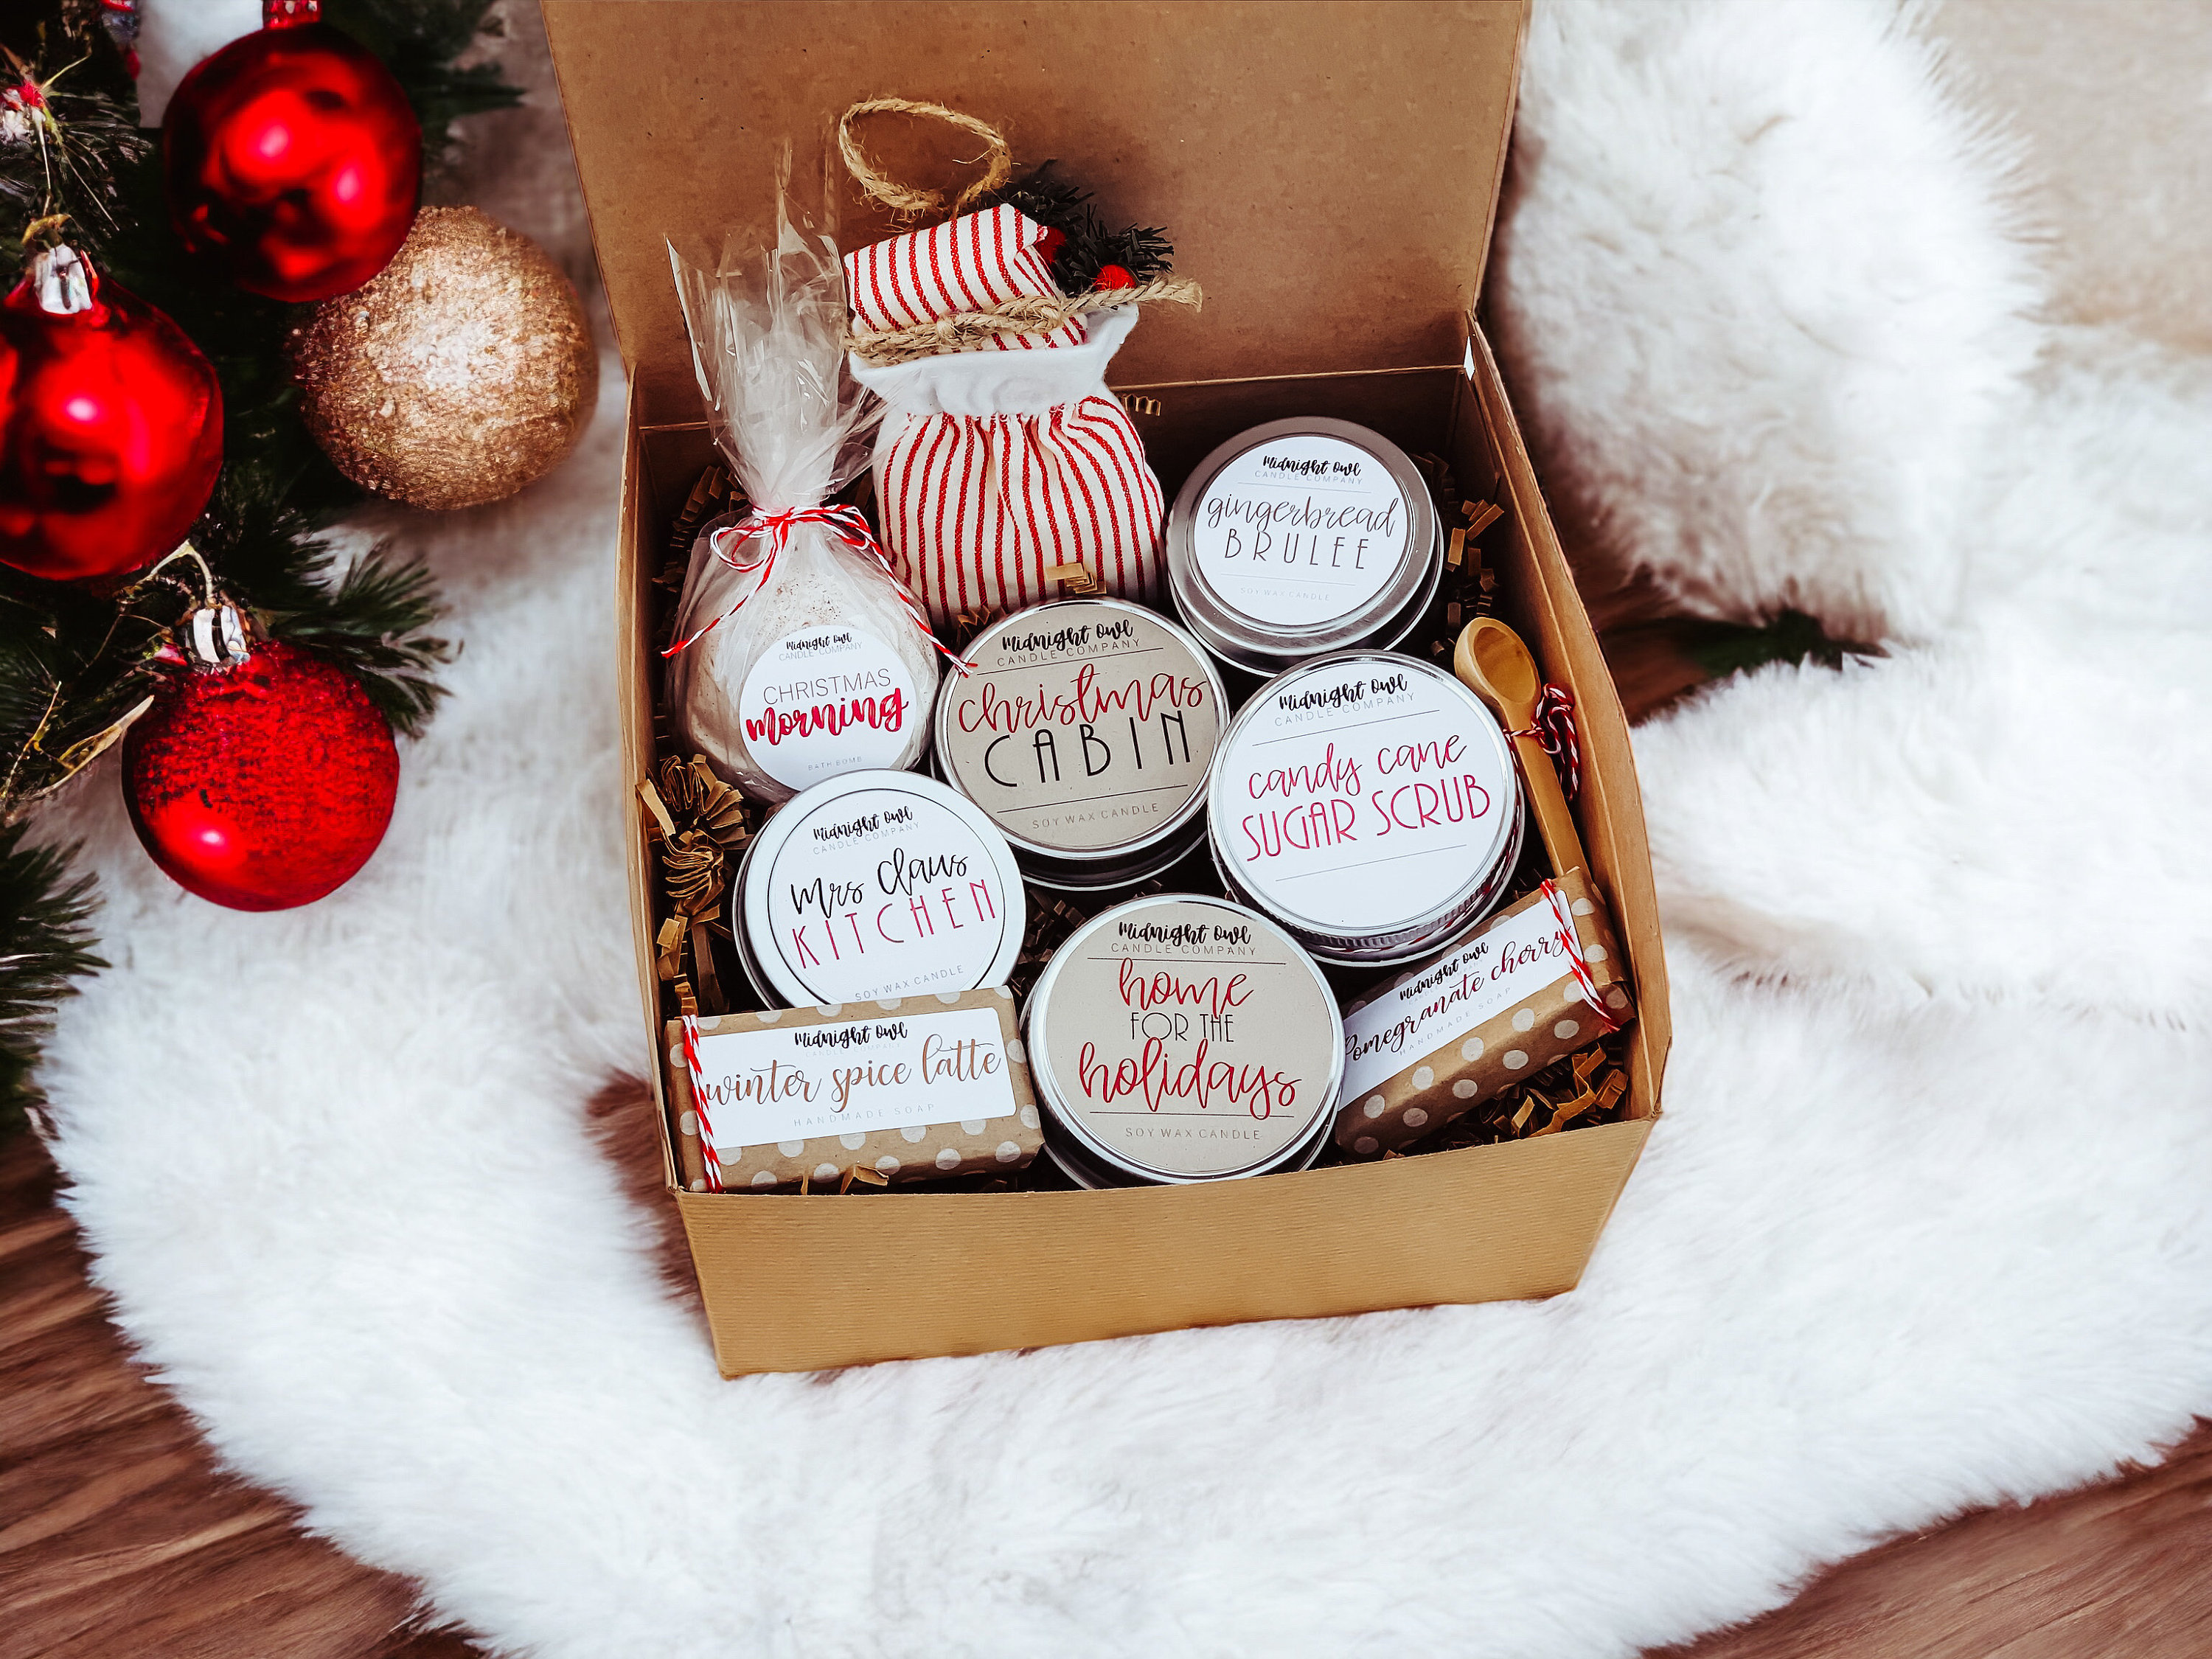 Christmas Spa Gifts for Women - Christmas Gift Ideas, Christmas Candles  Gift, Christmas Gift Baskets for Women, Mom, Sister, Wife, Friend with  Candle